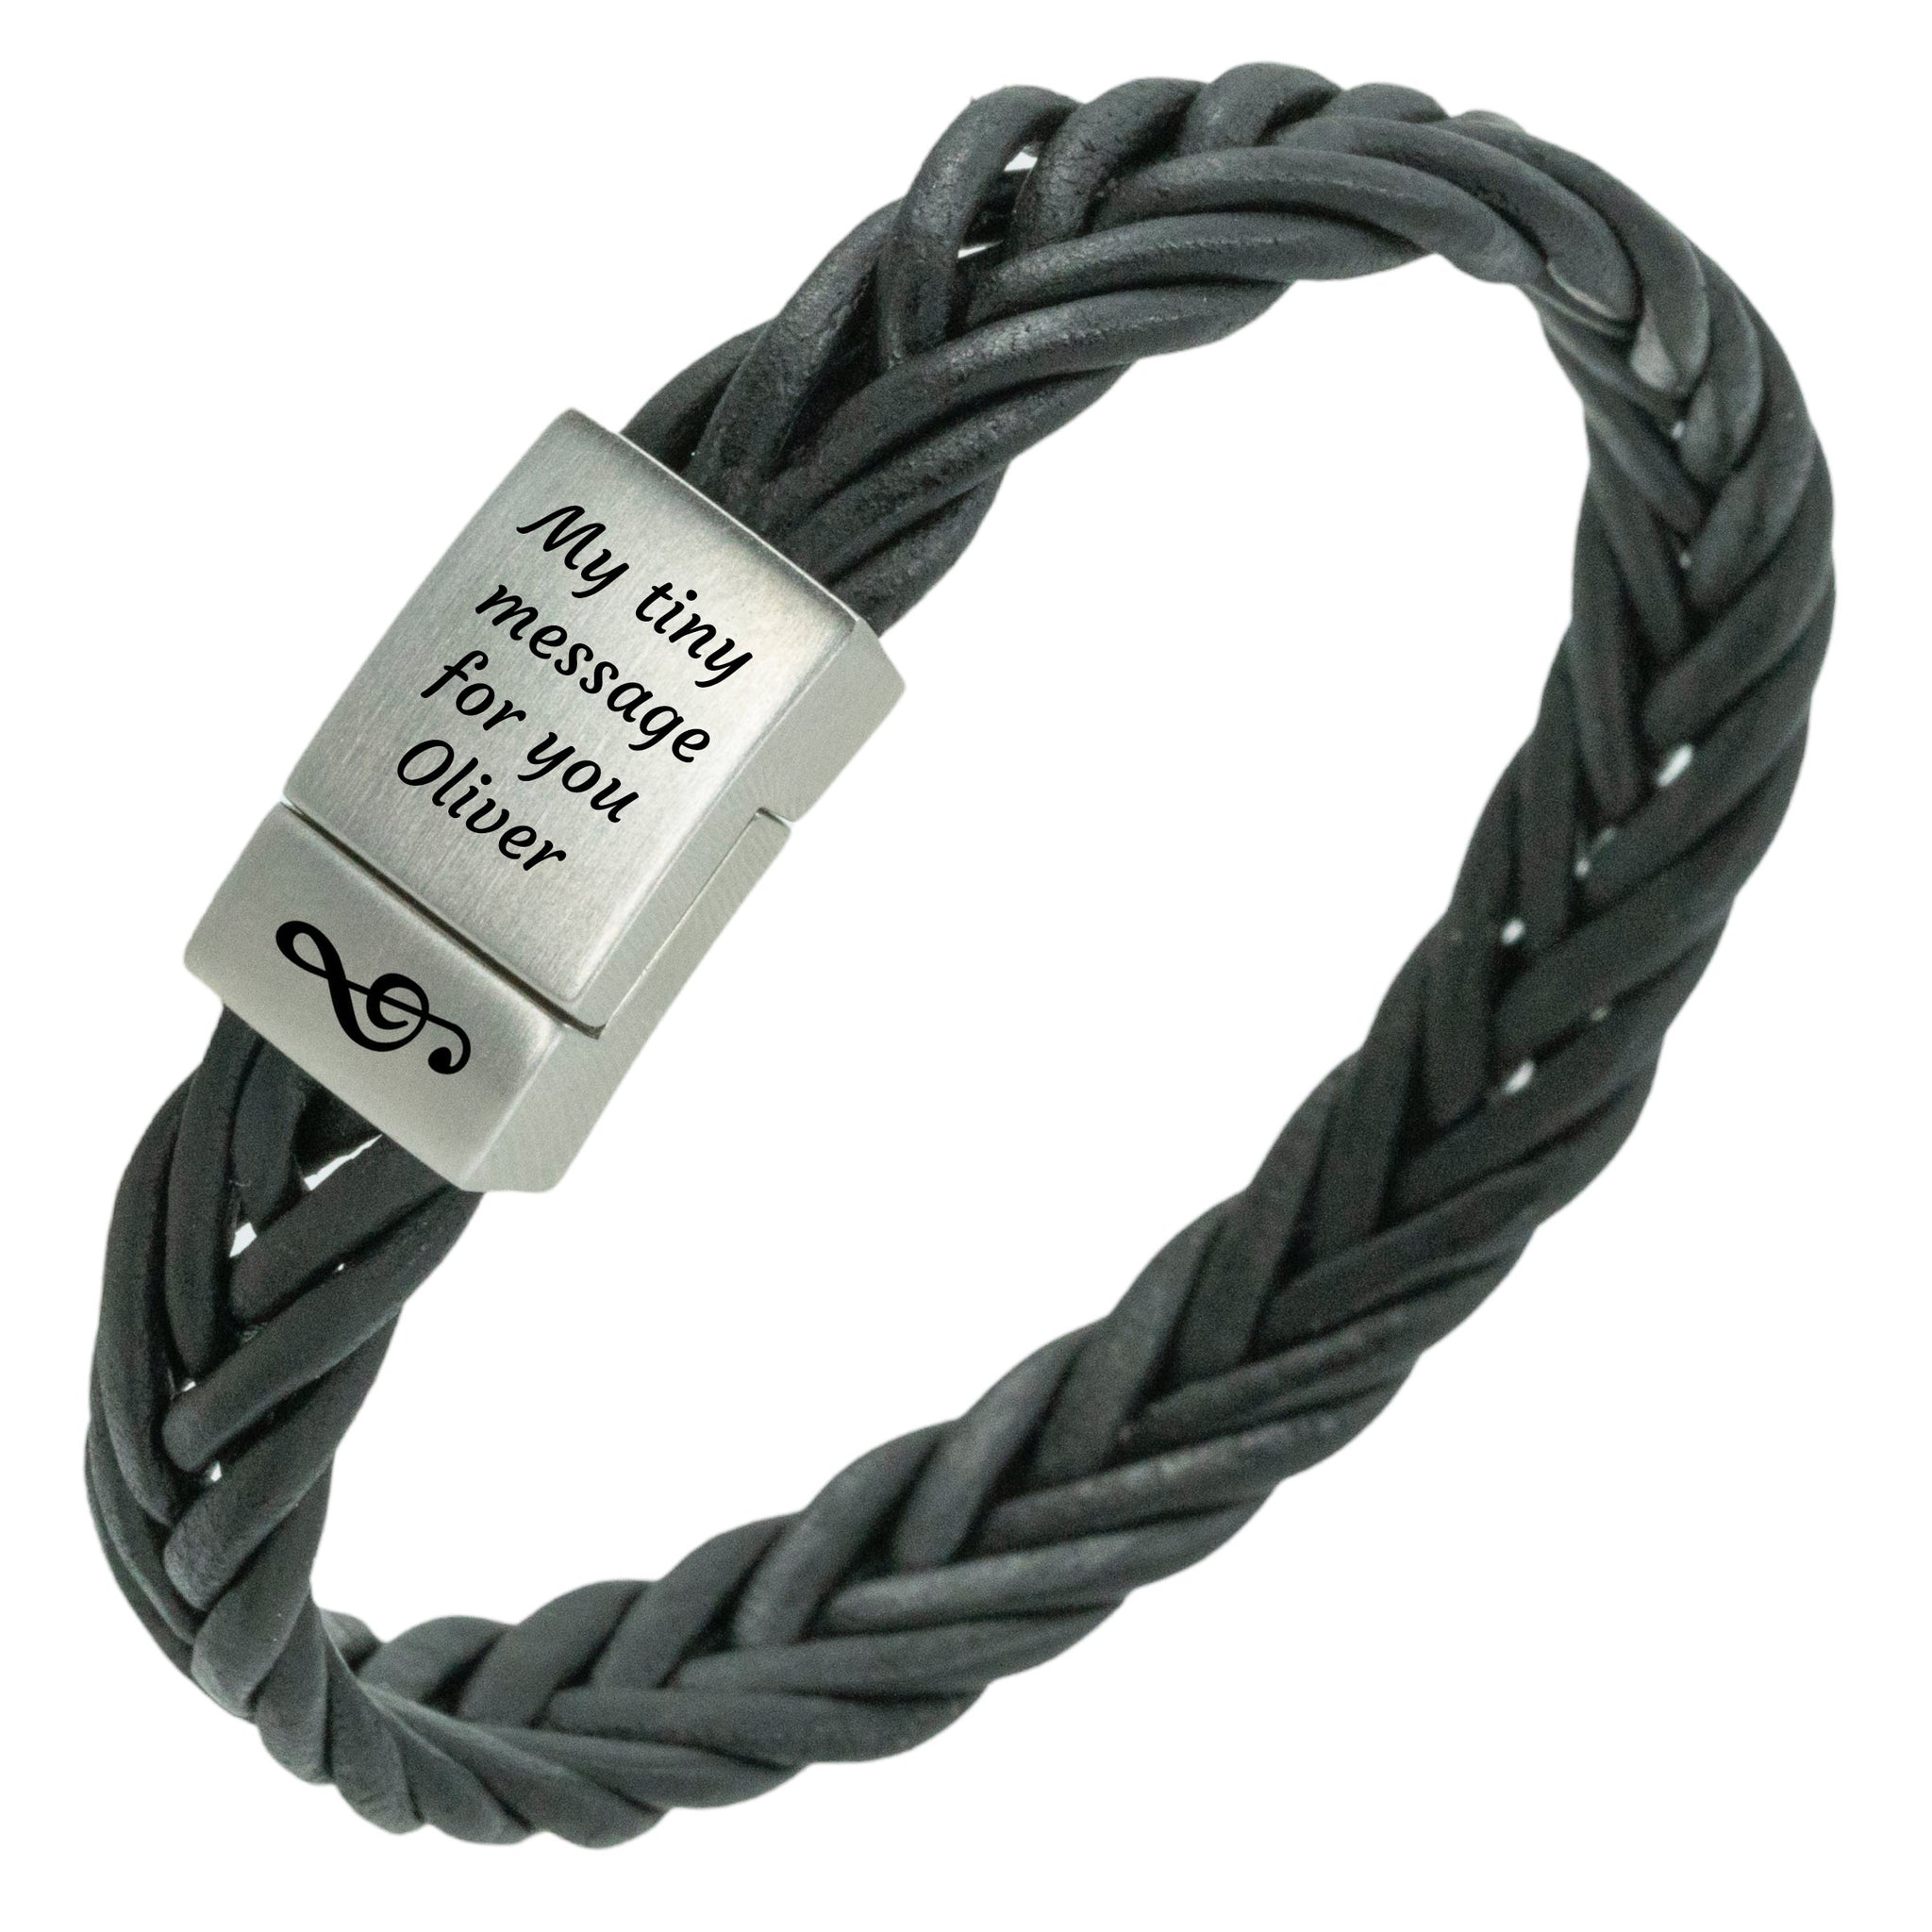 Stainless steel bracelet with engraving - braided leather